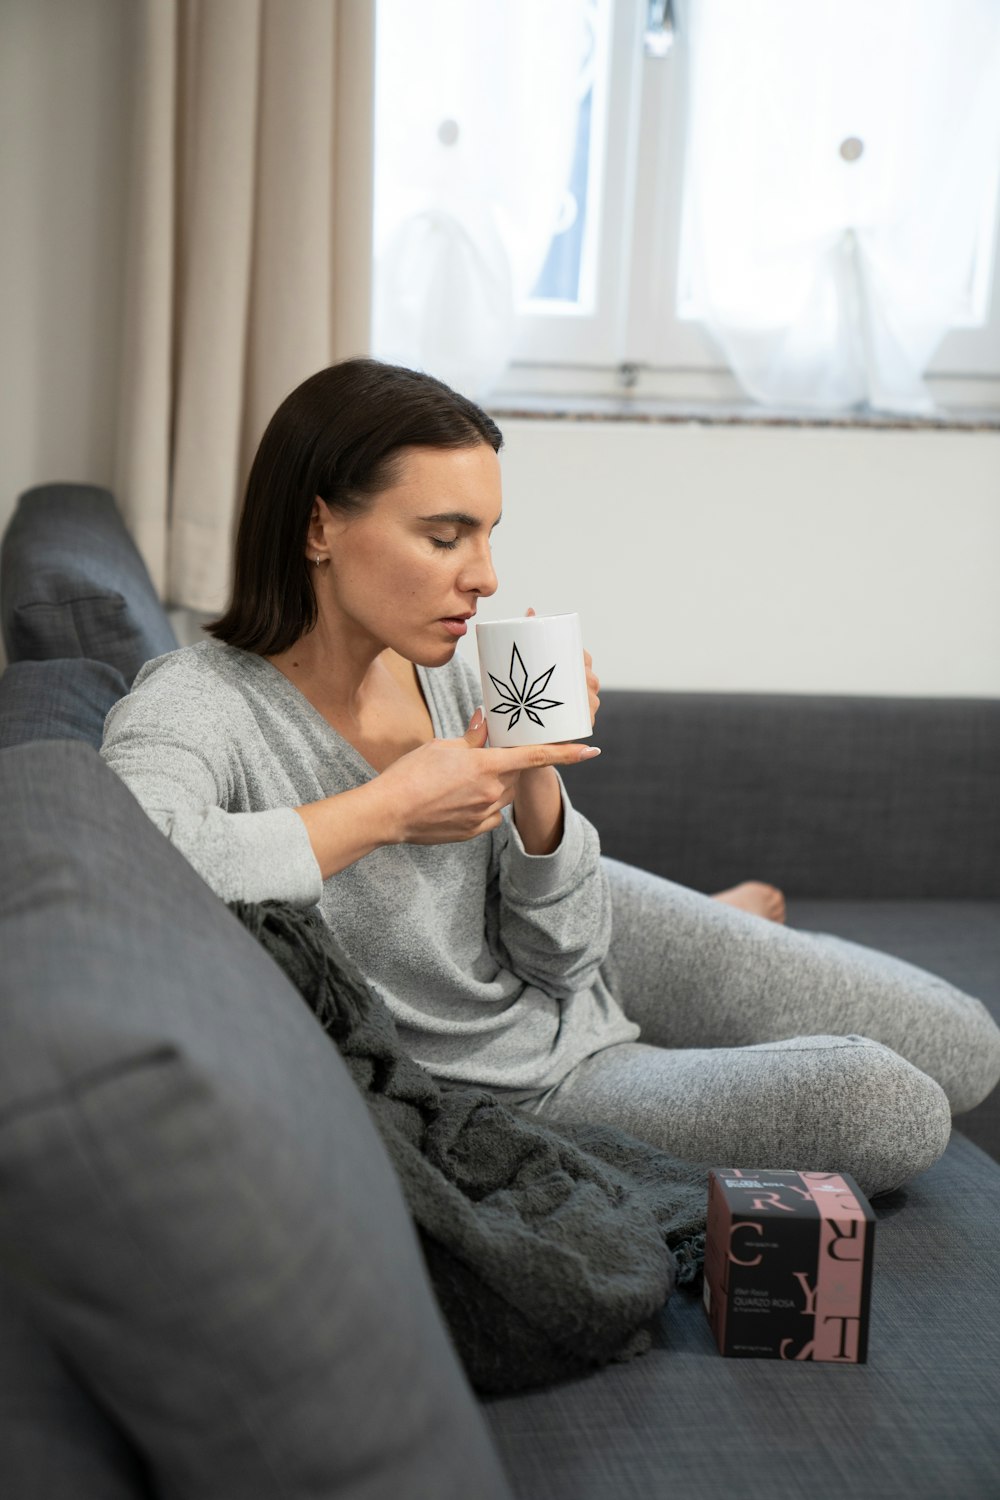 a woman sitting on a couch holding a coffee mug